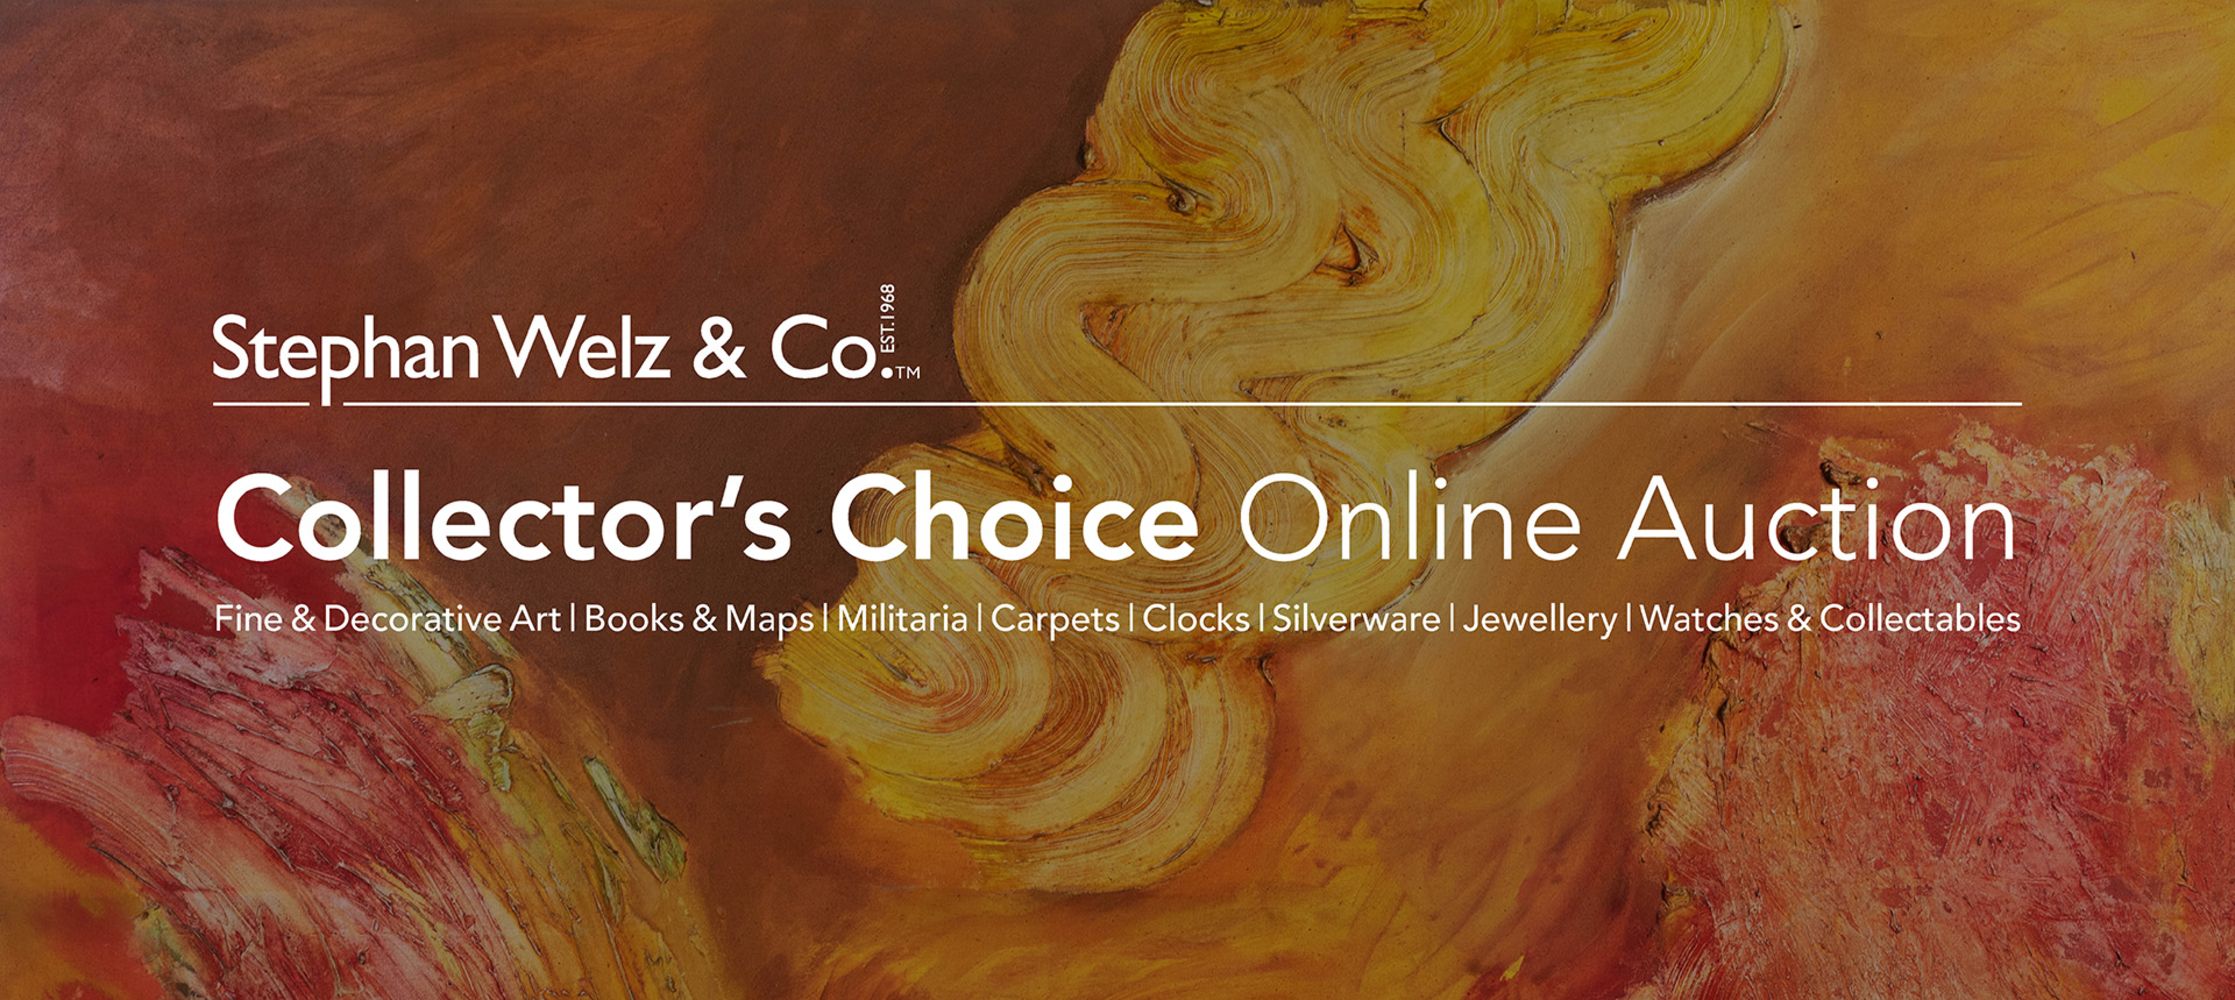 The Collector's Choice Online Auction